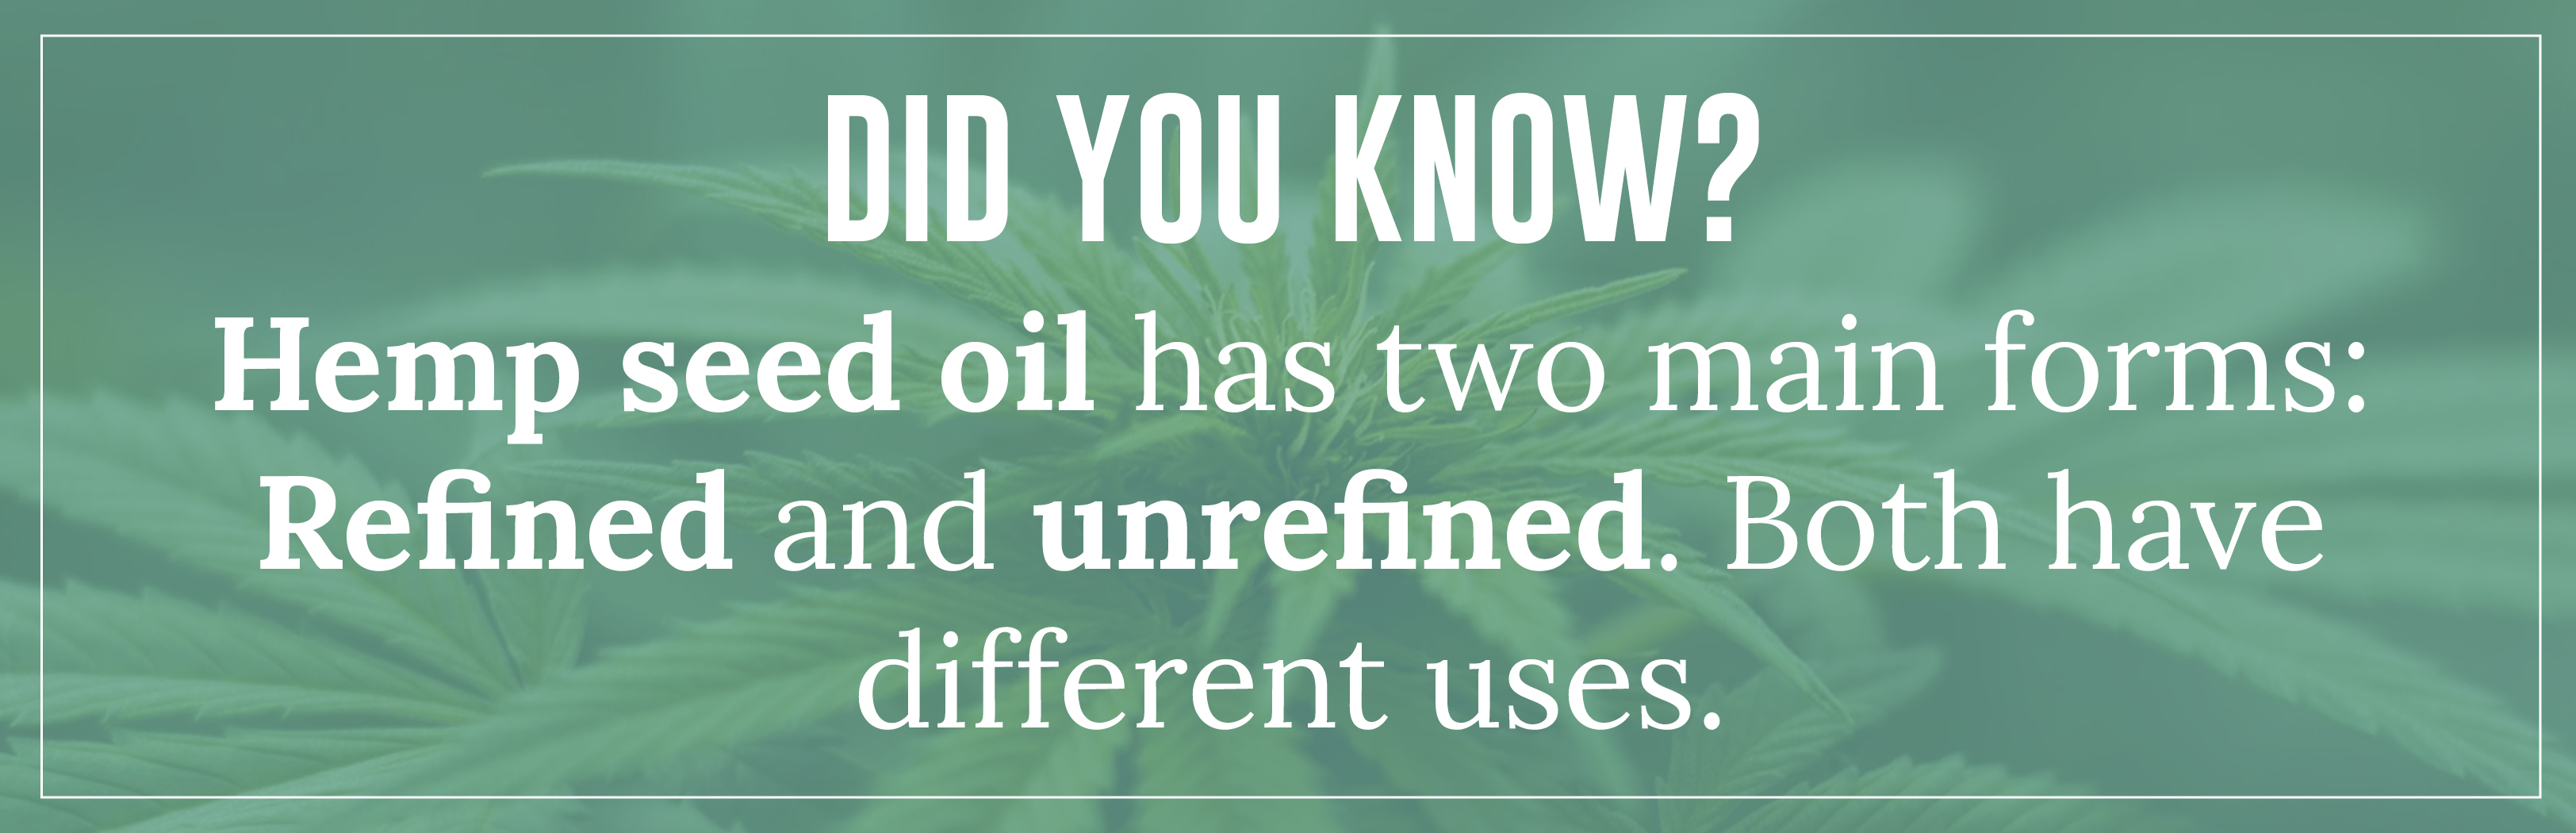 Hemp seed oil has two main forms: Refined and unrefined. Both have different uses.